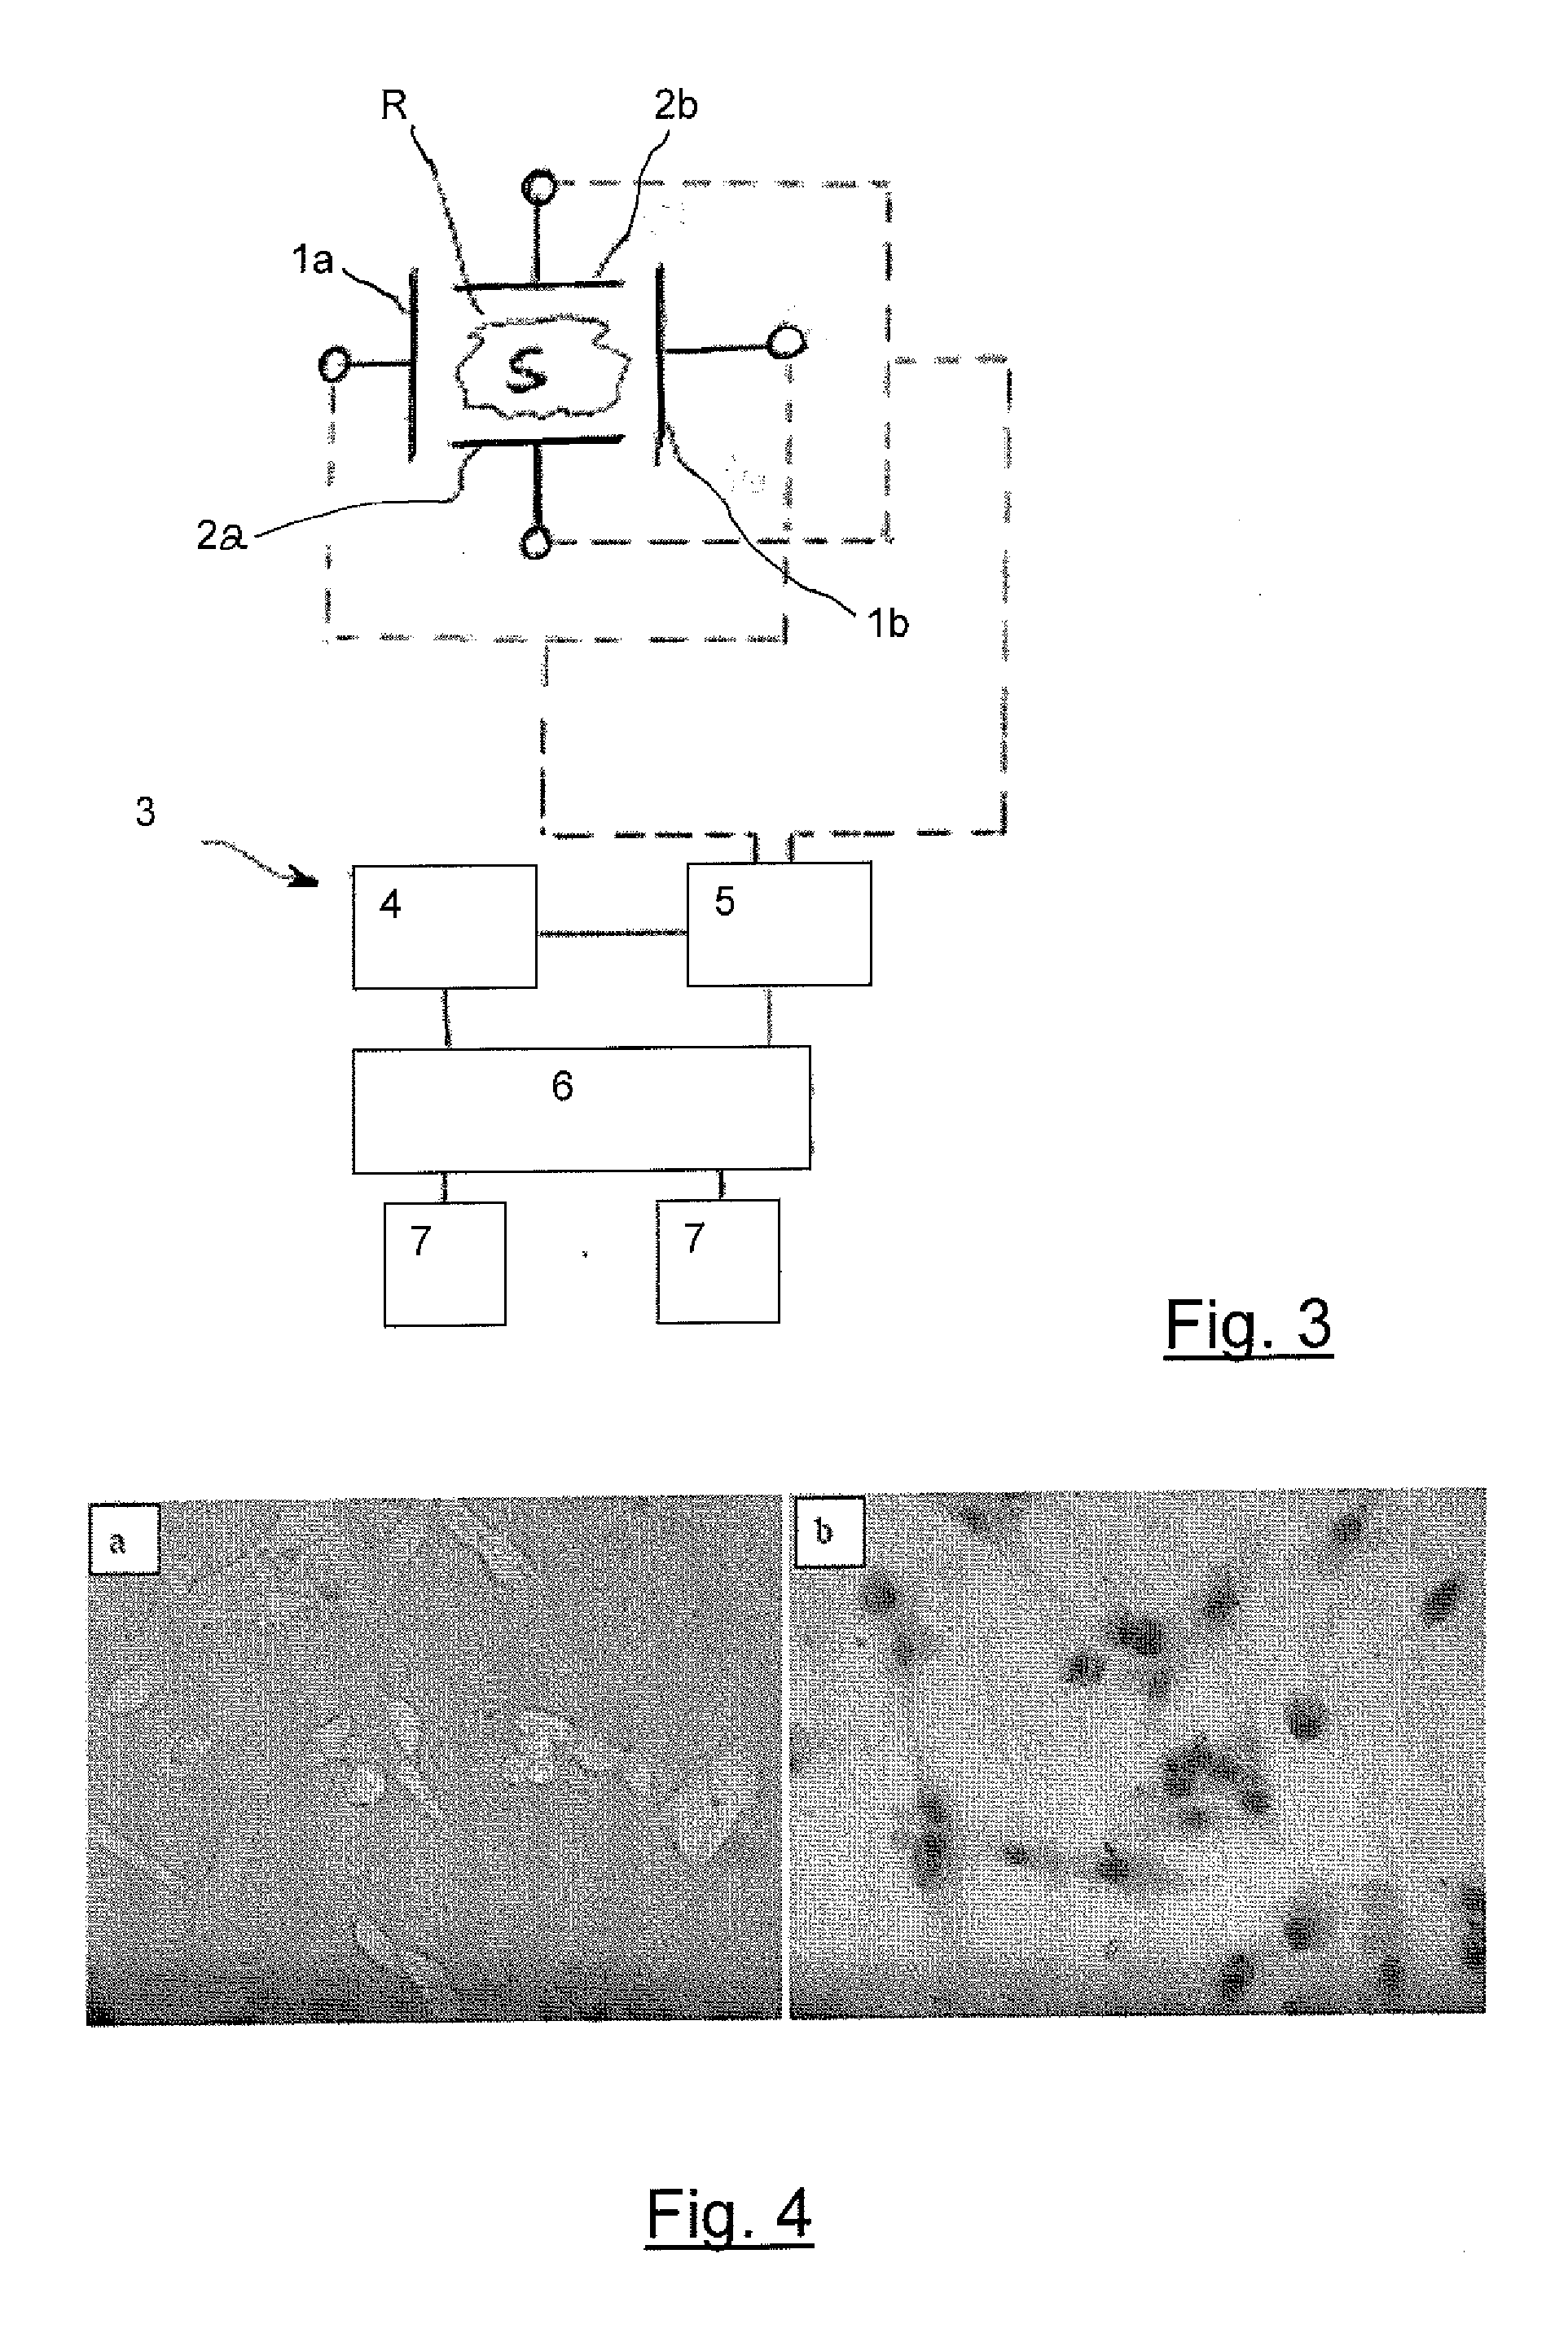 Non invasive method of electroporation mediated by carbon nanotubes and device for putting the method into practice